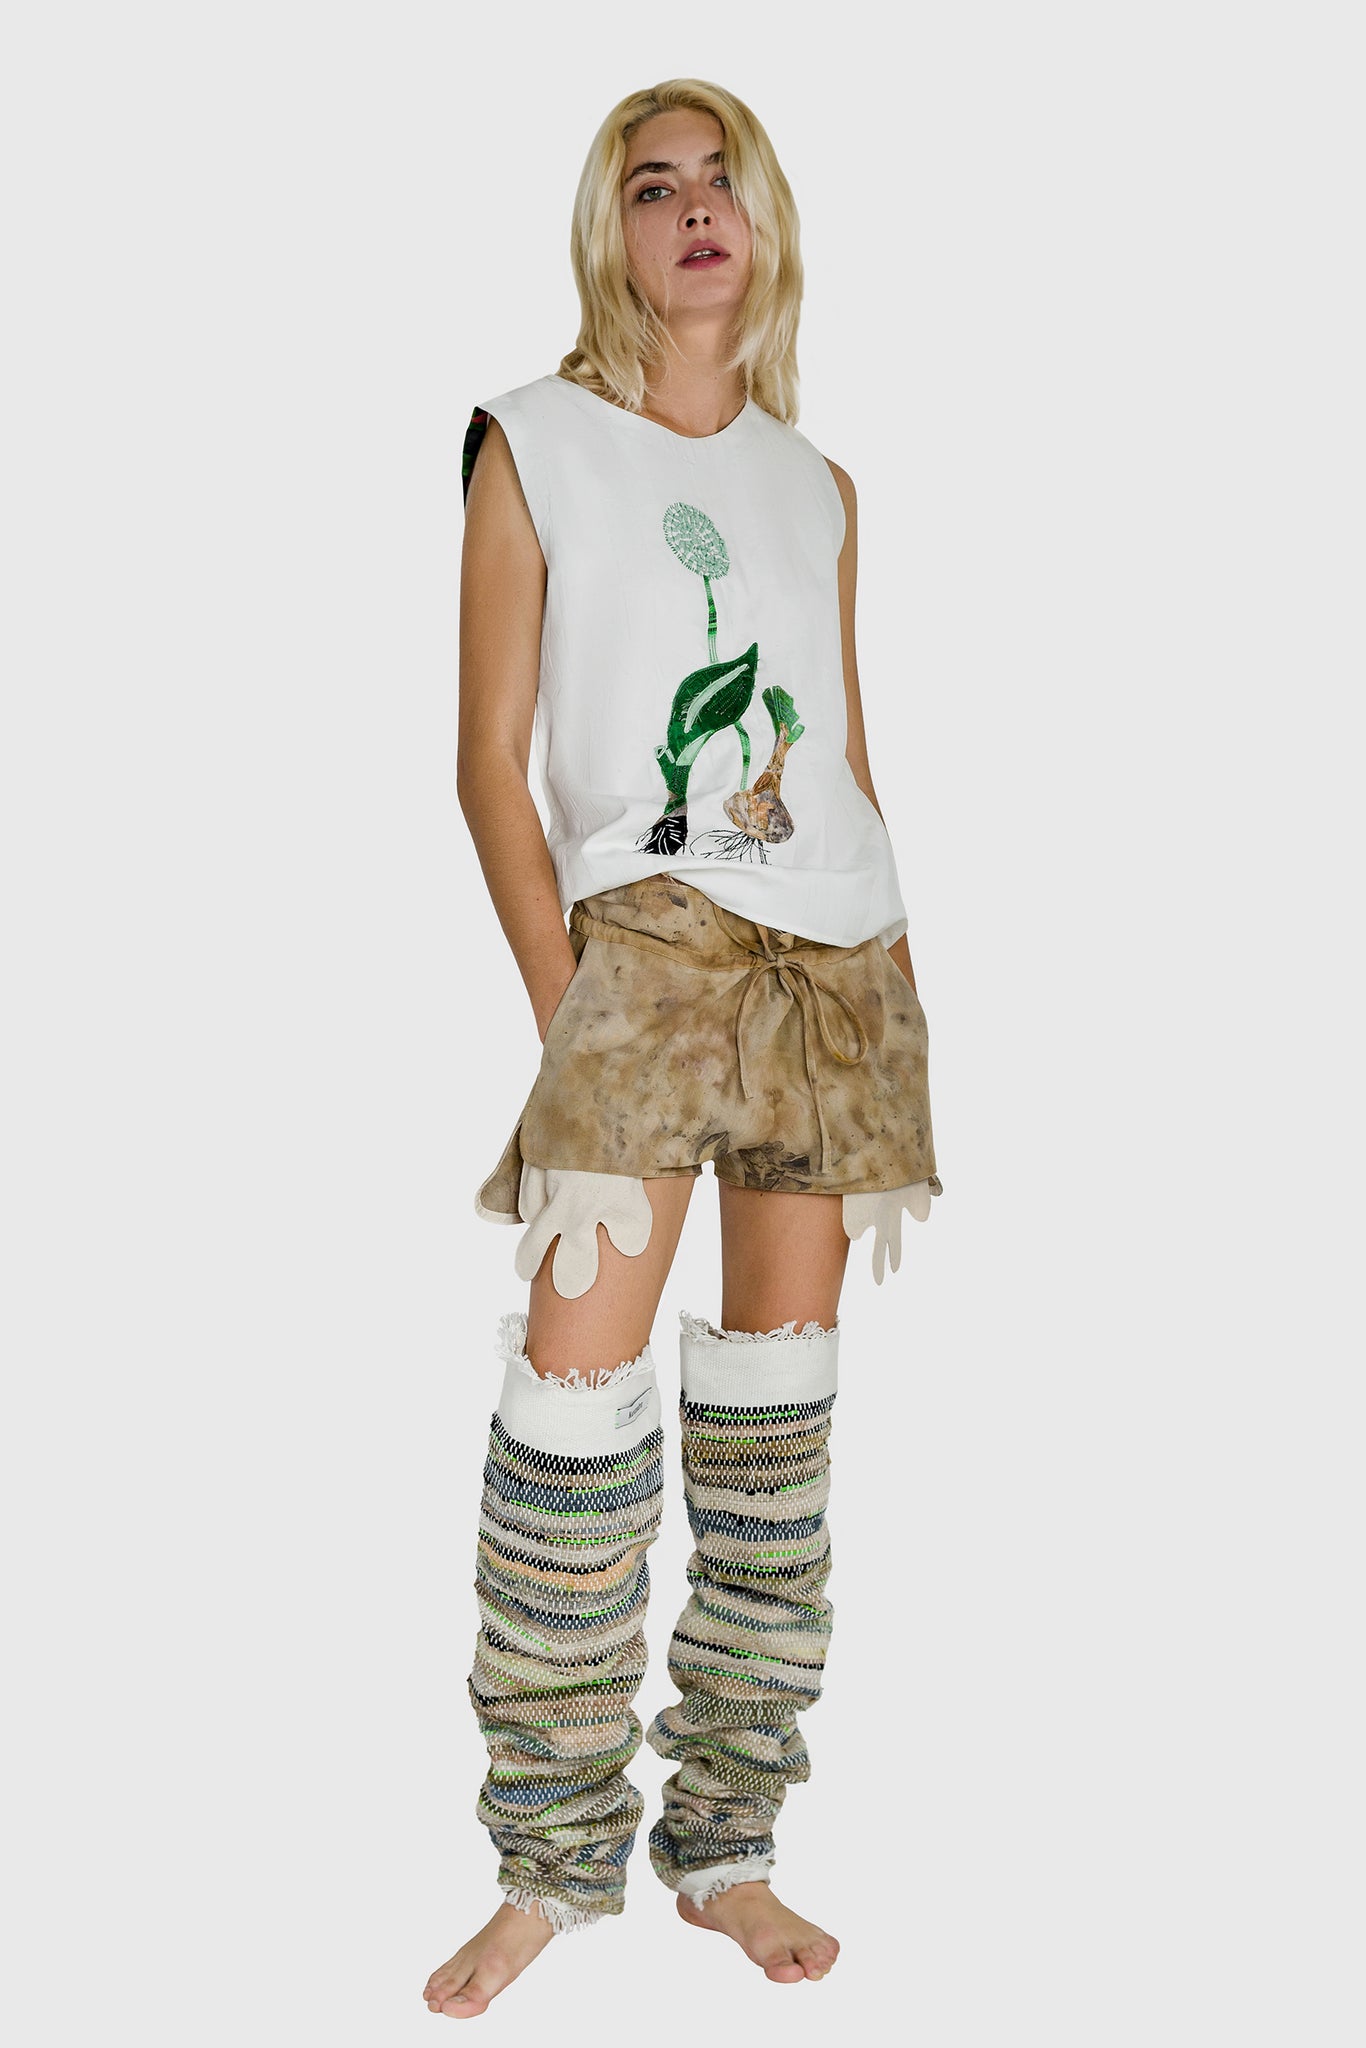 women's embroidered t-shirt, mini shorts and leg warmers, all cool and baggy streetwear, hands showing in shorts